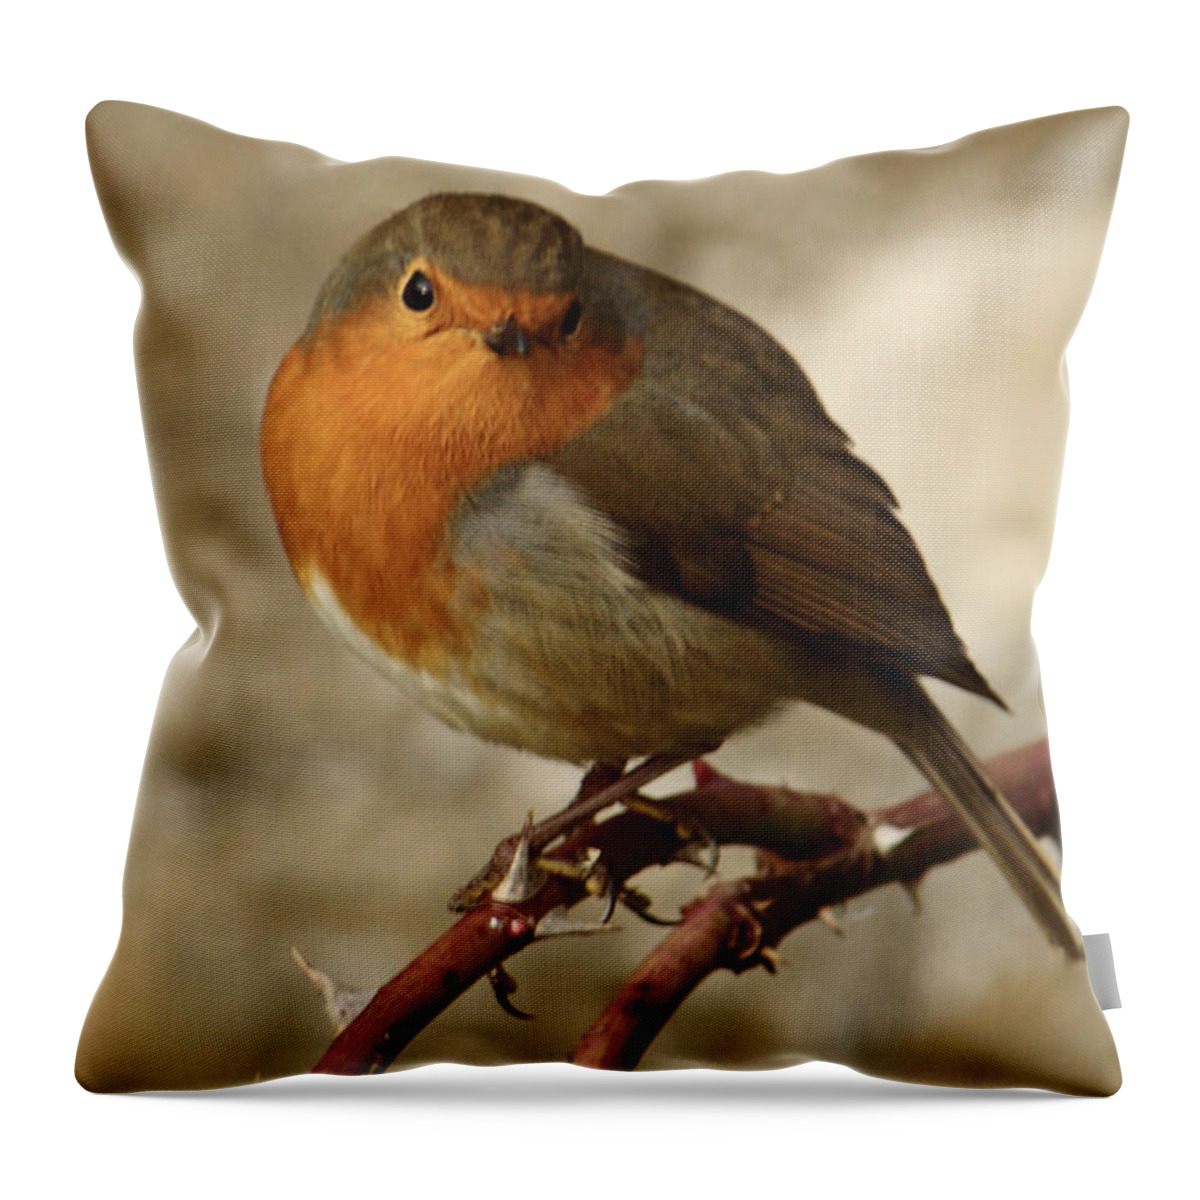 Bird Throw Pillow featuring the photograph Robin On Thorny Stem by Adrian Wale